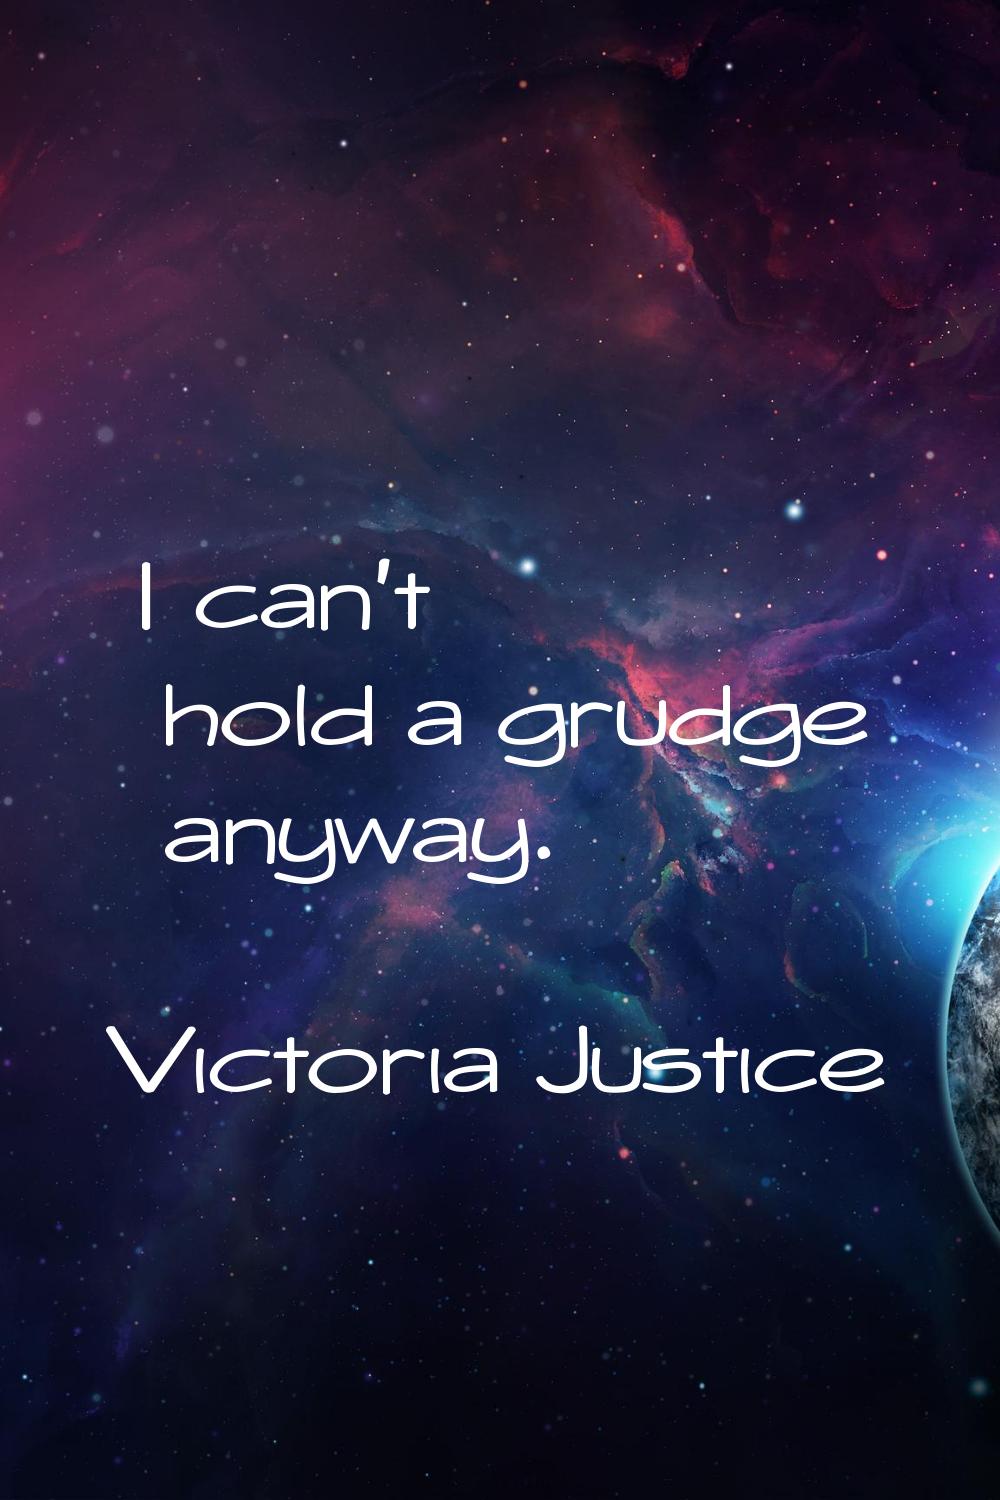 I can't hold a grudge anyway.